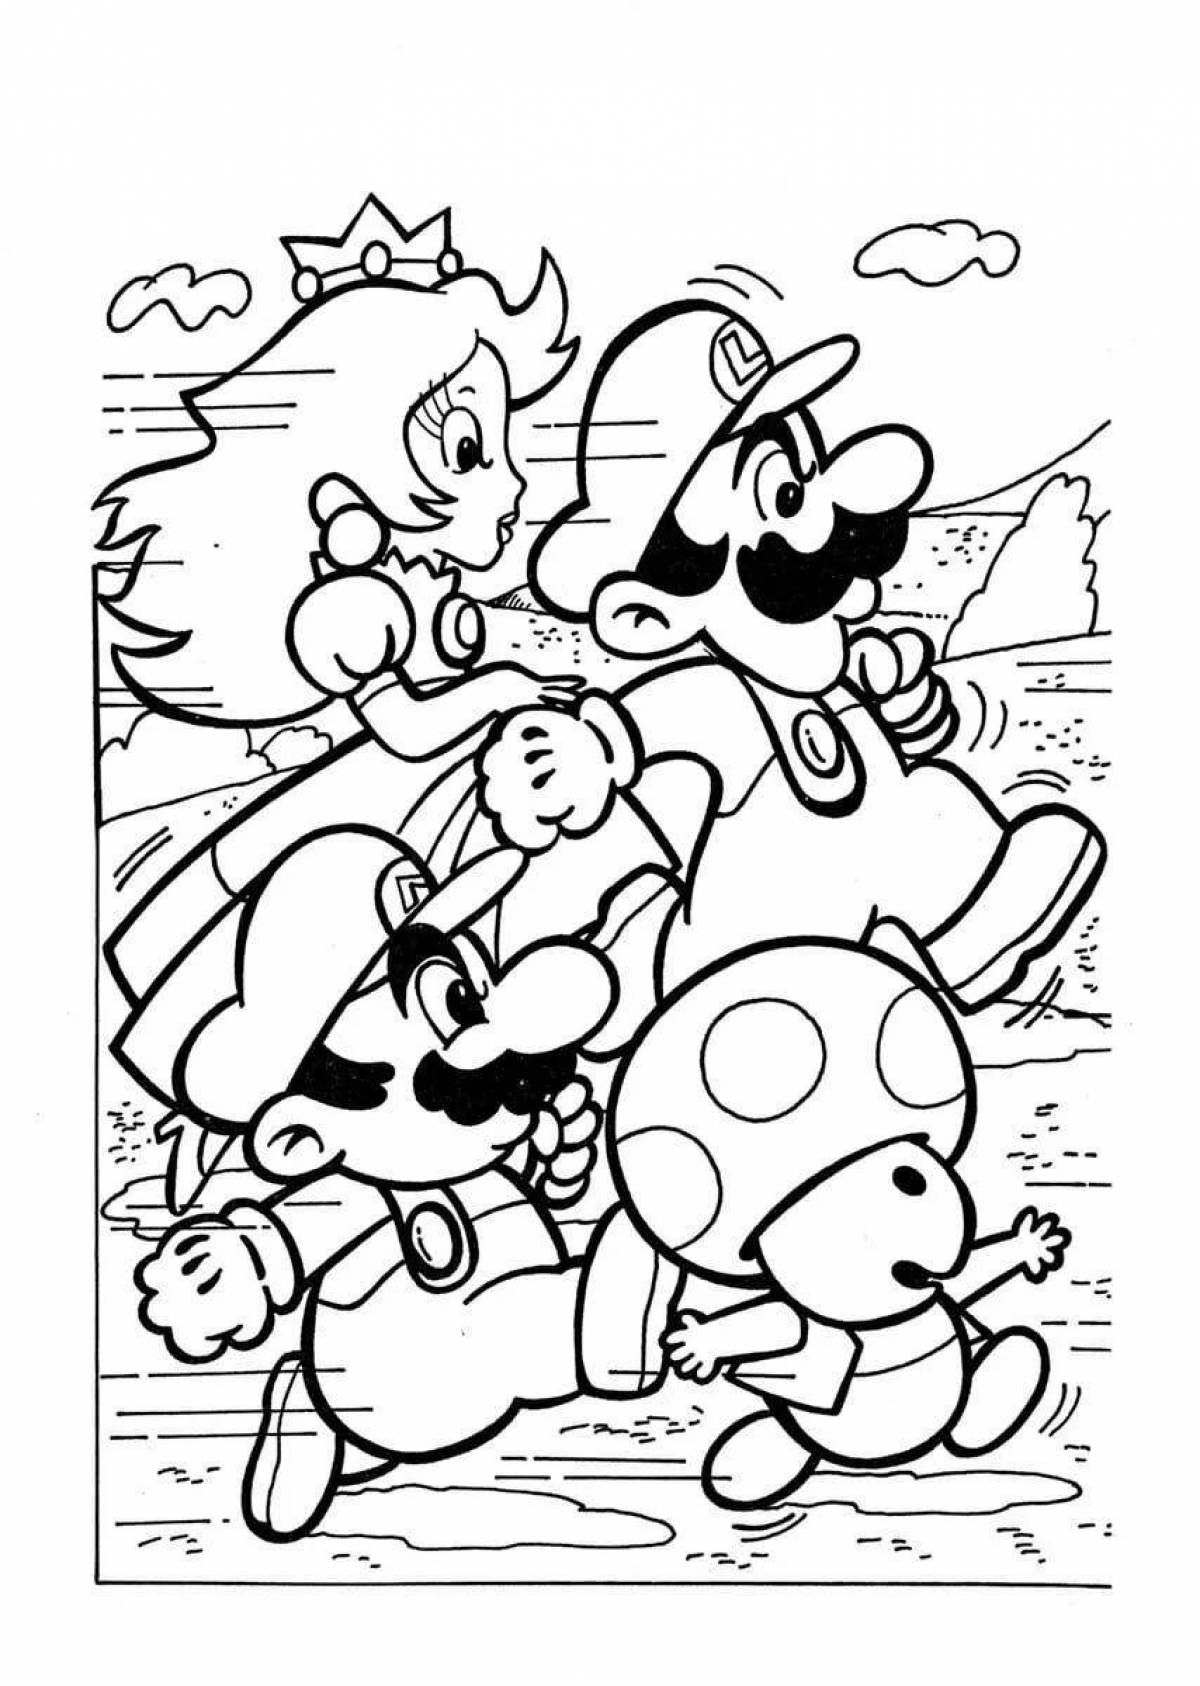 Mario fun coloring by numbers